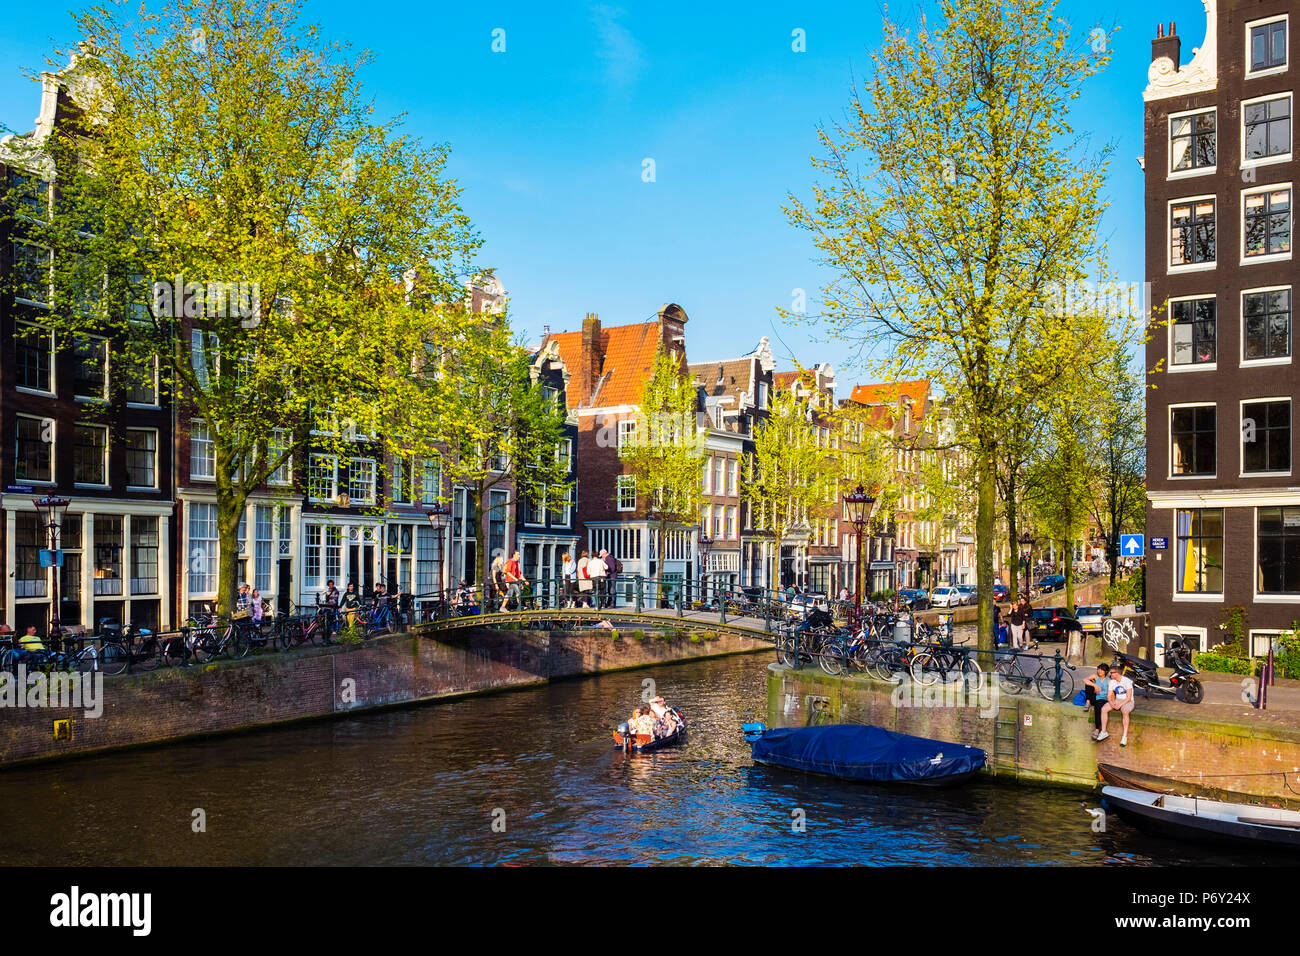 Netherlands, North Holland, Amsterdam. Canal houses and small footbridge on the Brouwersgracht canal at intersction of Herengracht. Stock Photo